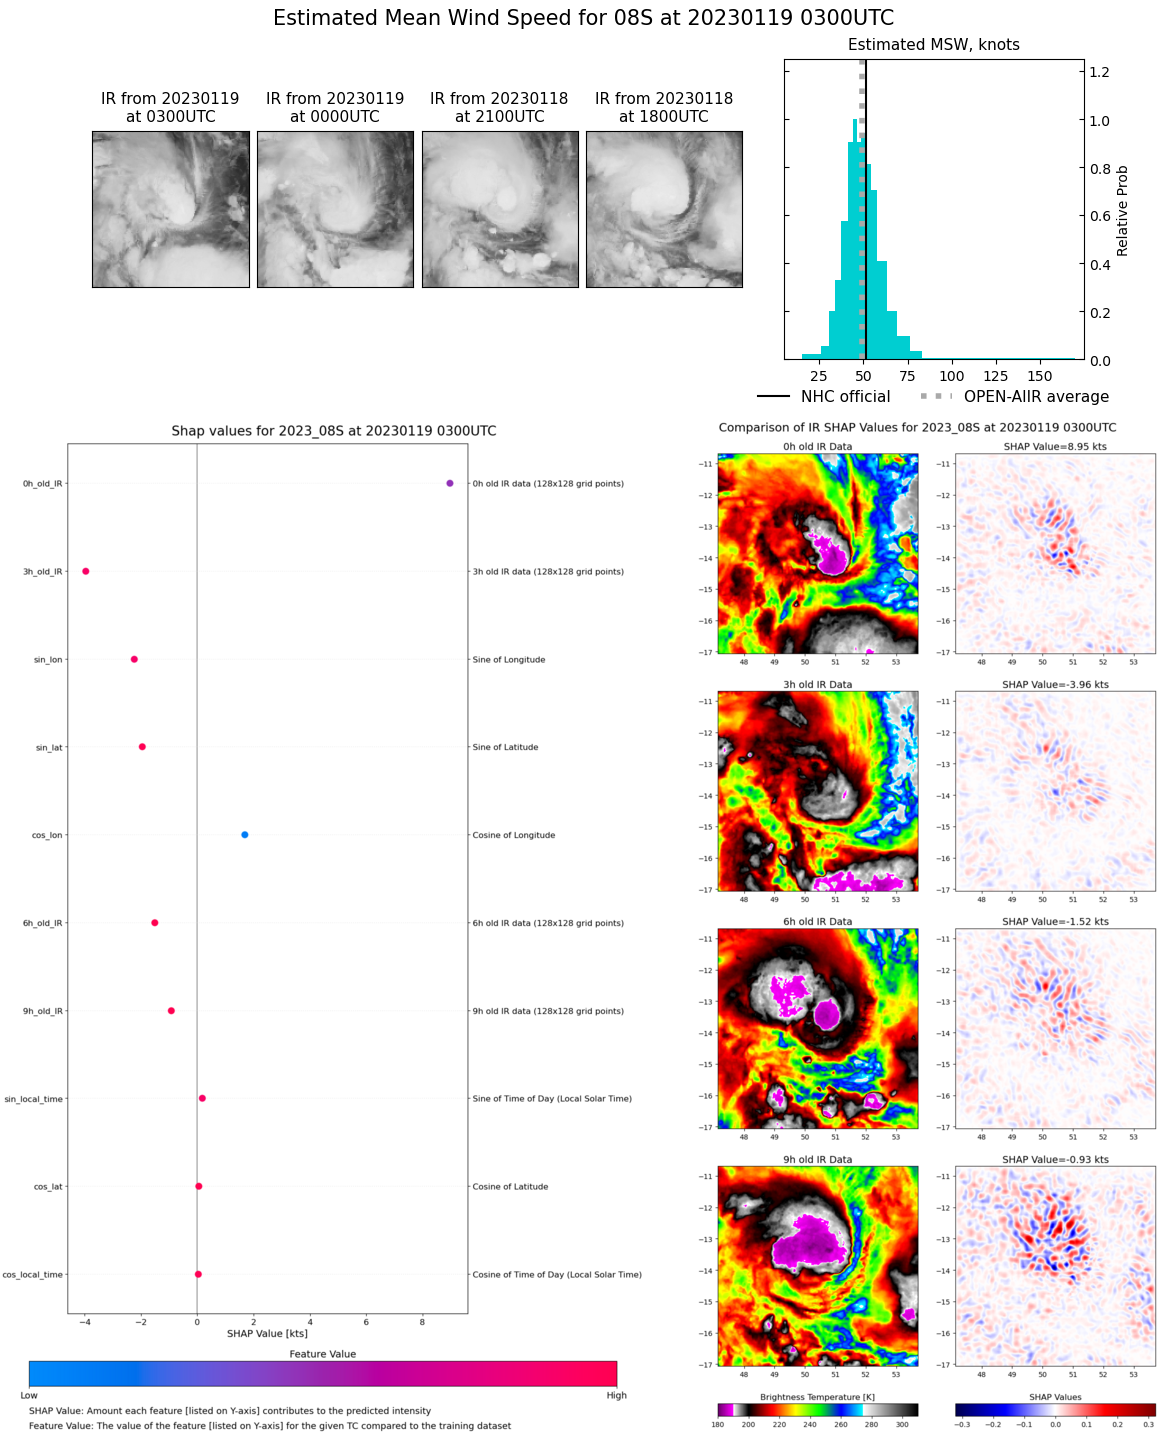 SATELLITE ANALYSIS, INITIAL POSITION AND INTENSITY DISCUSSION: ANIMATED ENHANCED INFRARED (EIR) SATELLITE IMAGERY DEPICTS A RAPIDLY CONSOLIDATING SYSTEM WITH A CENTRAL DENSE OVERCAST FEATURE  OBSCURING THE LOW-LEVEL CIRCULATION CENTER (LLCC). THIS IMPROVEMENT IS EVIDENT IN AN 181418Z SSMIS 91GHZ MICROWAVE IMAGE, WHICH REVEALS A COMPACT CORE SURROUNDING A SMALL MICROWAVE EYE FEATURE AND DEEP CONVECTIVE BANDING OVER THE WESTERN SEMICIRCLE. OVERALL ENVIRONMENTAL CONDITIONS ARE FAVORABLE WITH ROBUST POLEWARD OUTFLOW, LOW TO MODERATE VERTICAL WIND SHEAR AND WARM SST VALUES. THE INITIAL POSITION IS PLACED WITH HIGH CONFIDENCE BASED ON THE SSMIS IMAGE. THE INITIAL INTENSITY OF 55 KTS IS ASSESSED WITH HIGH CONFIDENCE BASED ON THE KNES AND FMEE DVORAK ESTIMATES AS WELL AS A TIMELY 181432Z SMAP IMAGE SHOWING 58 KNOT (1-MINUTE AVERAGE) WINDS OVER THE NORTHERN QUADRANT.